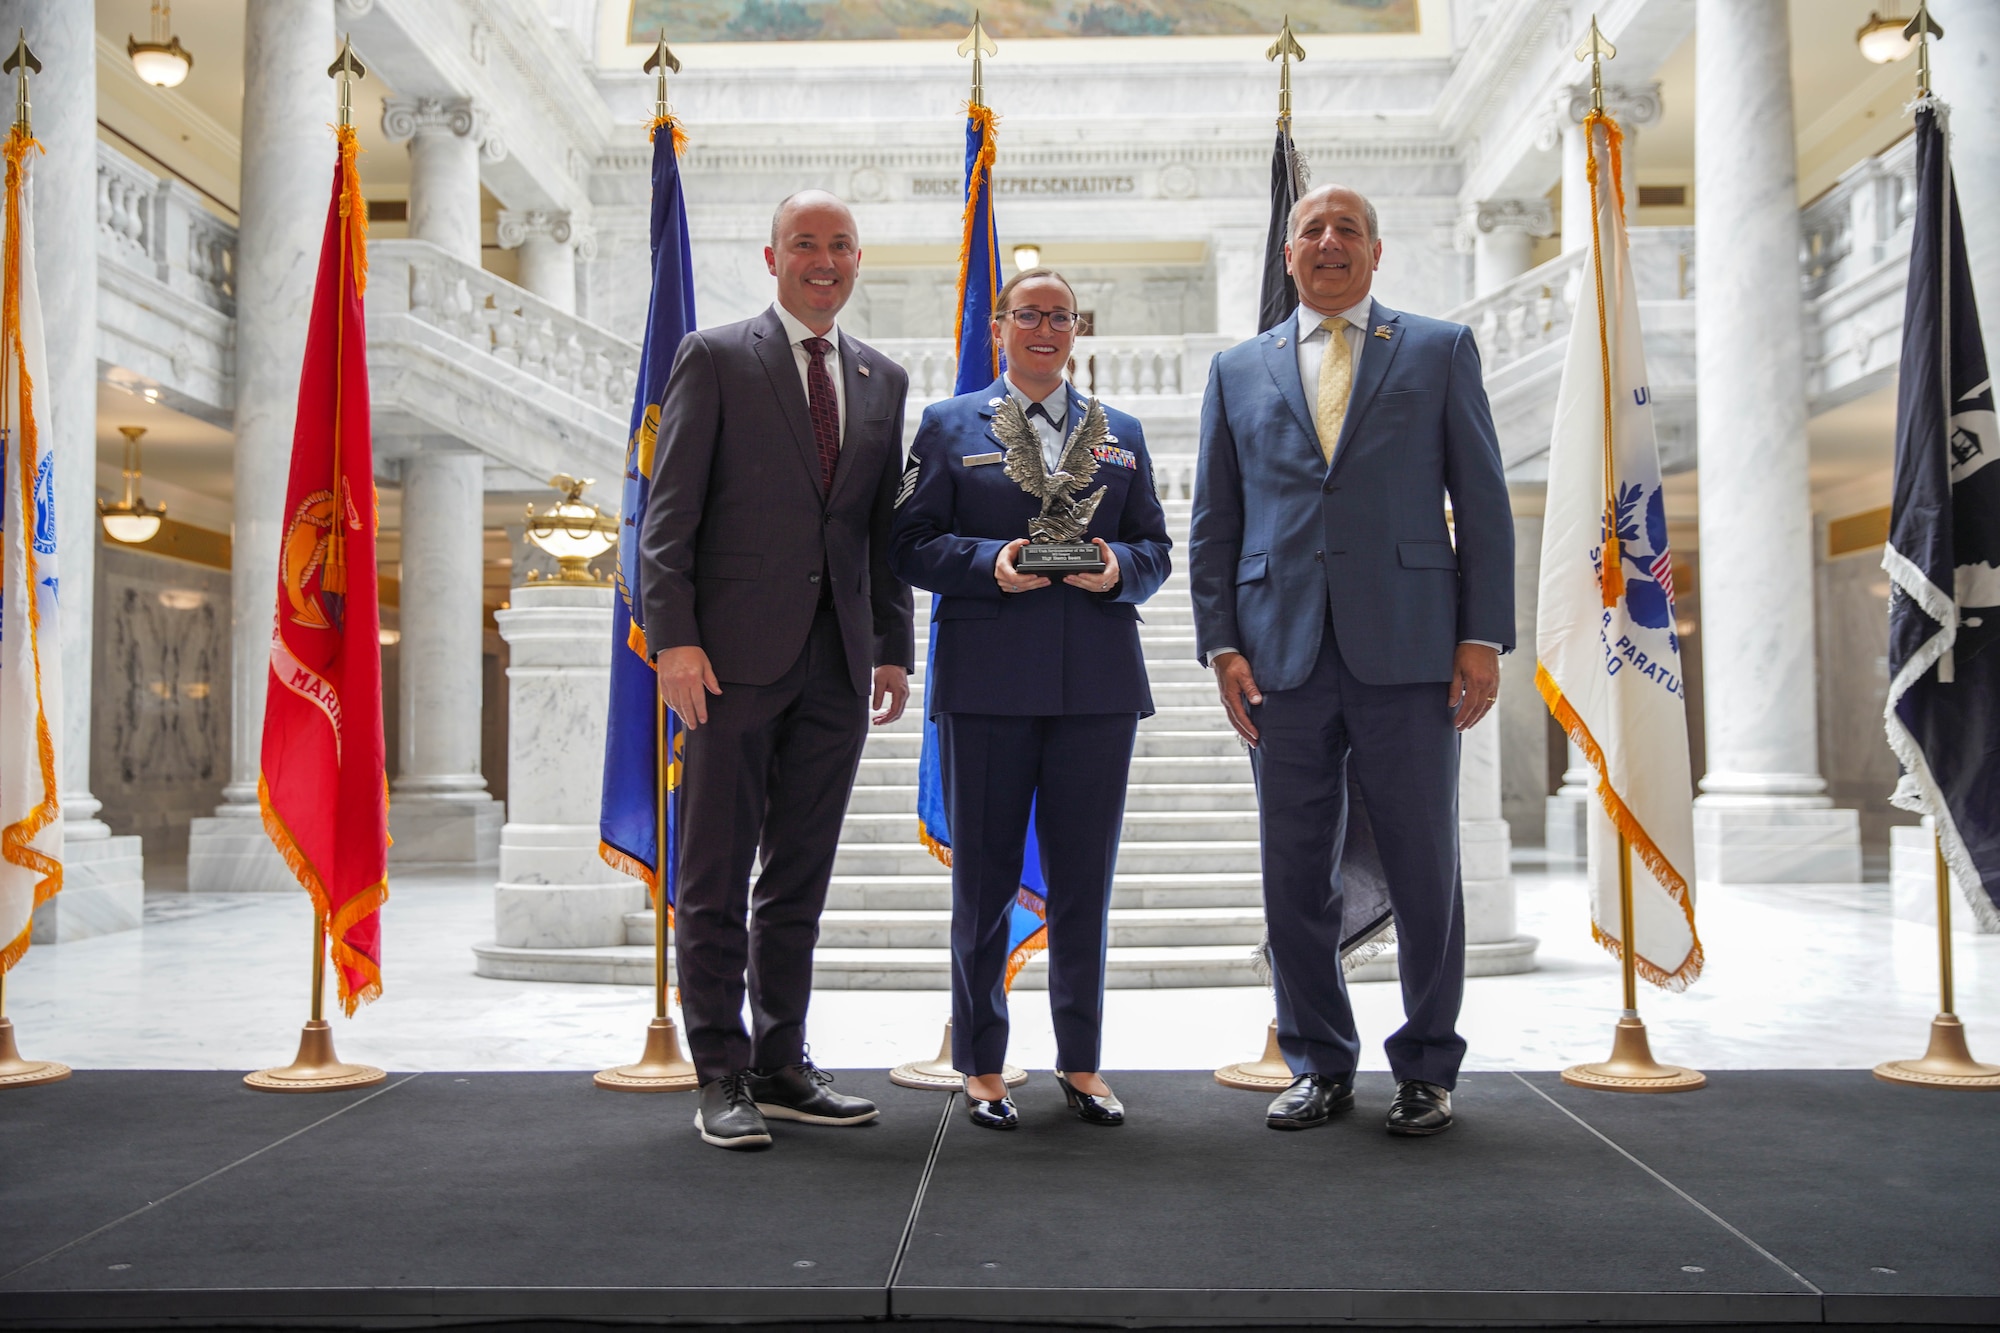 Master Sgt. Sierra Beers, reservist in the 67th Aerial Port Squadron, poses with Utah Gov. Spencer Cox and Utah Department of Military & Veteran Affairs Gary Harter